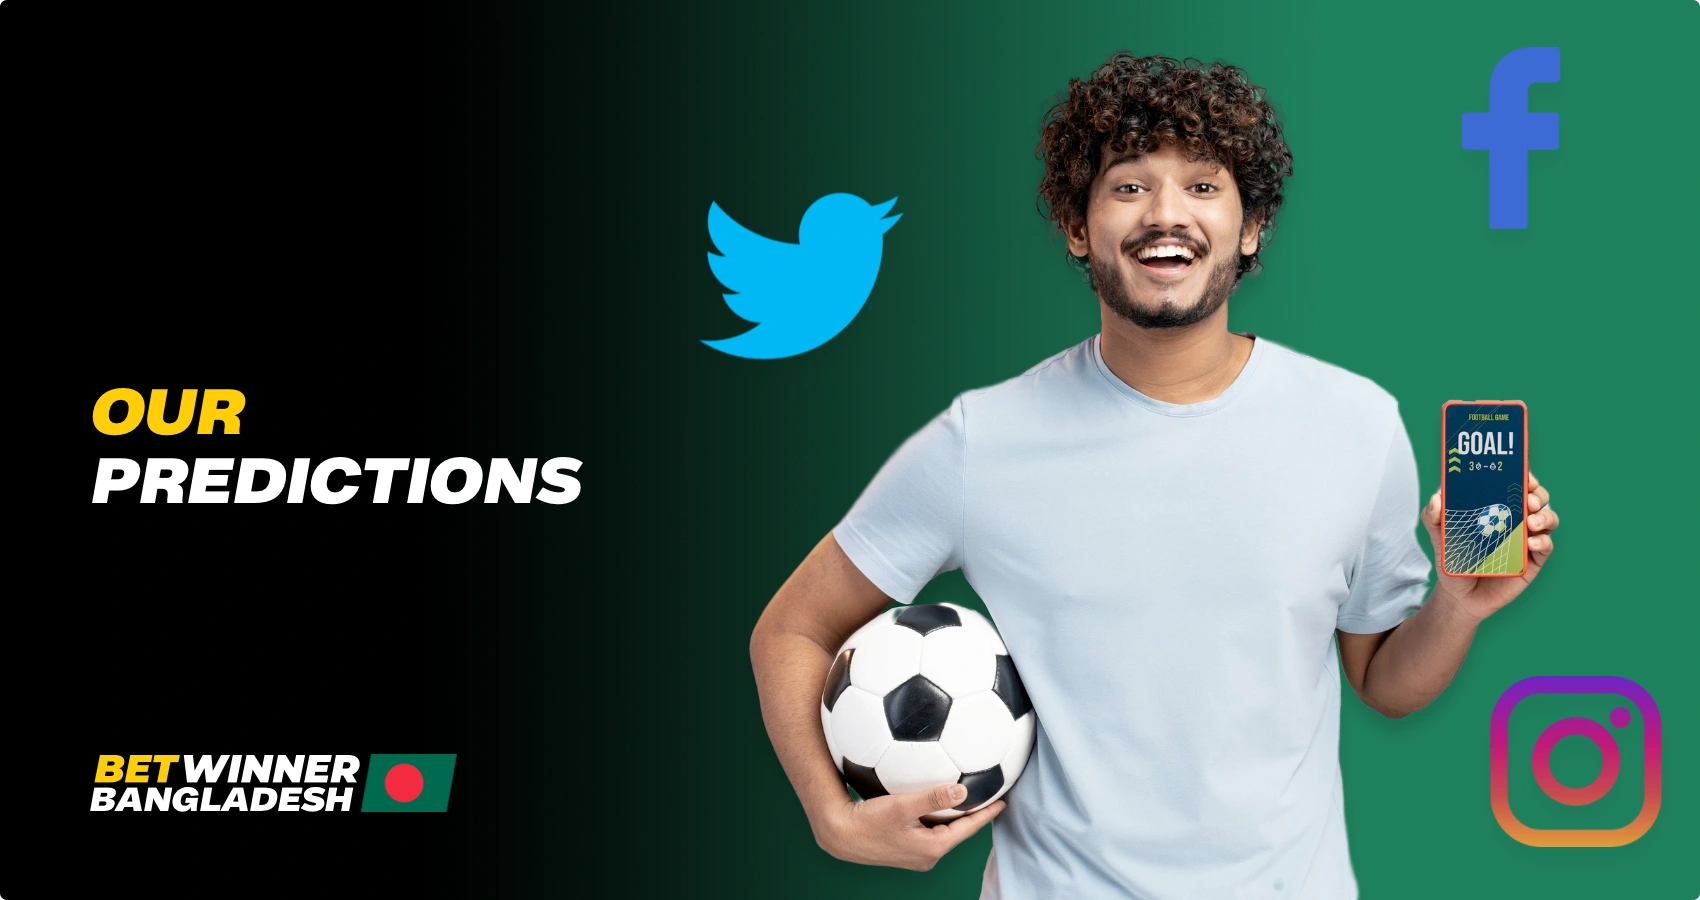 5 Actionable Tips on Online Betting with Betwinner And Twitter.